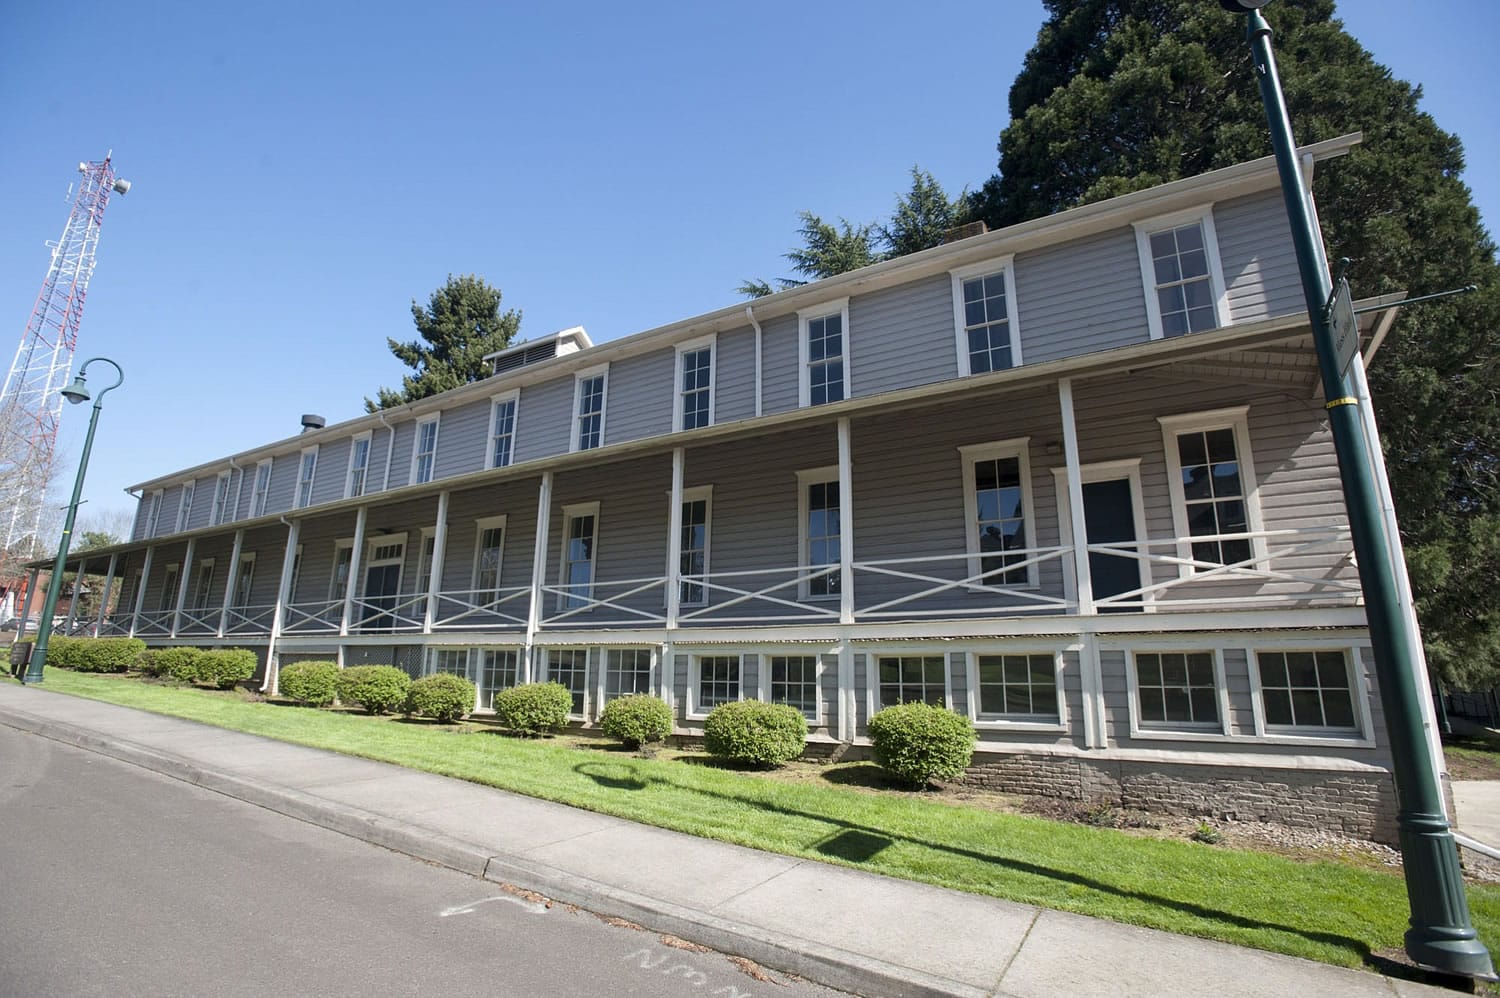 The long-vacant Infantry Barracks at Fort Vancouver will be renovated into studio and one-bedroom apartments over the next year as part of an $8.3 million &quot;adaptive reuse&quot; project involving four buildings.